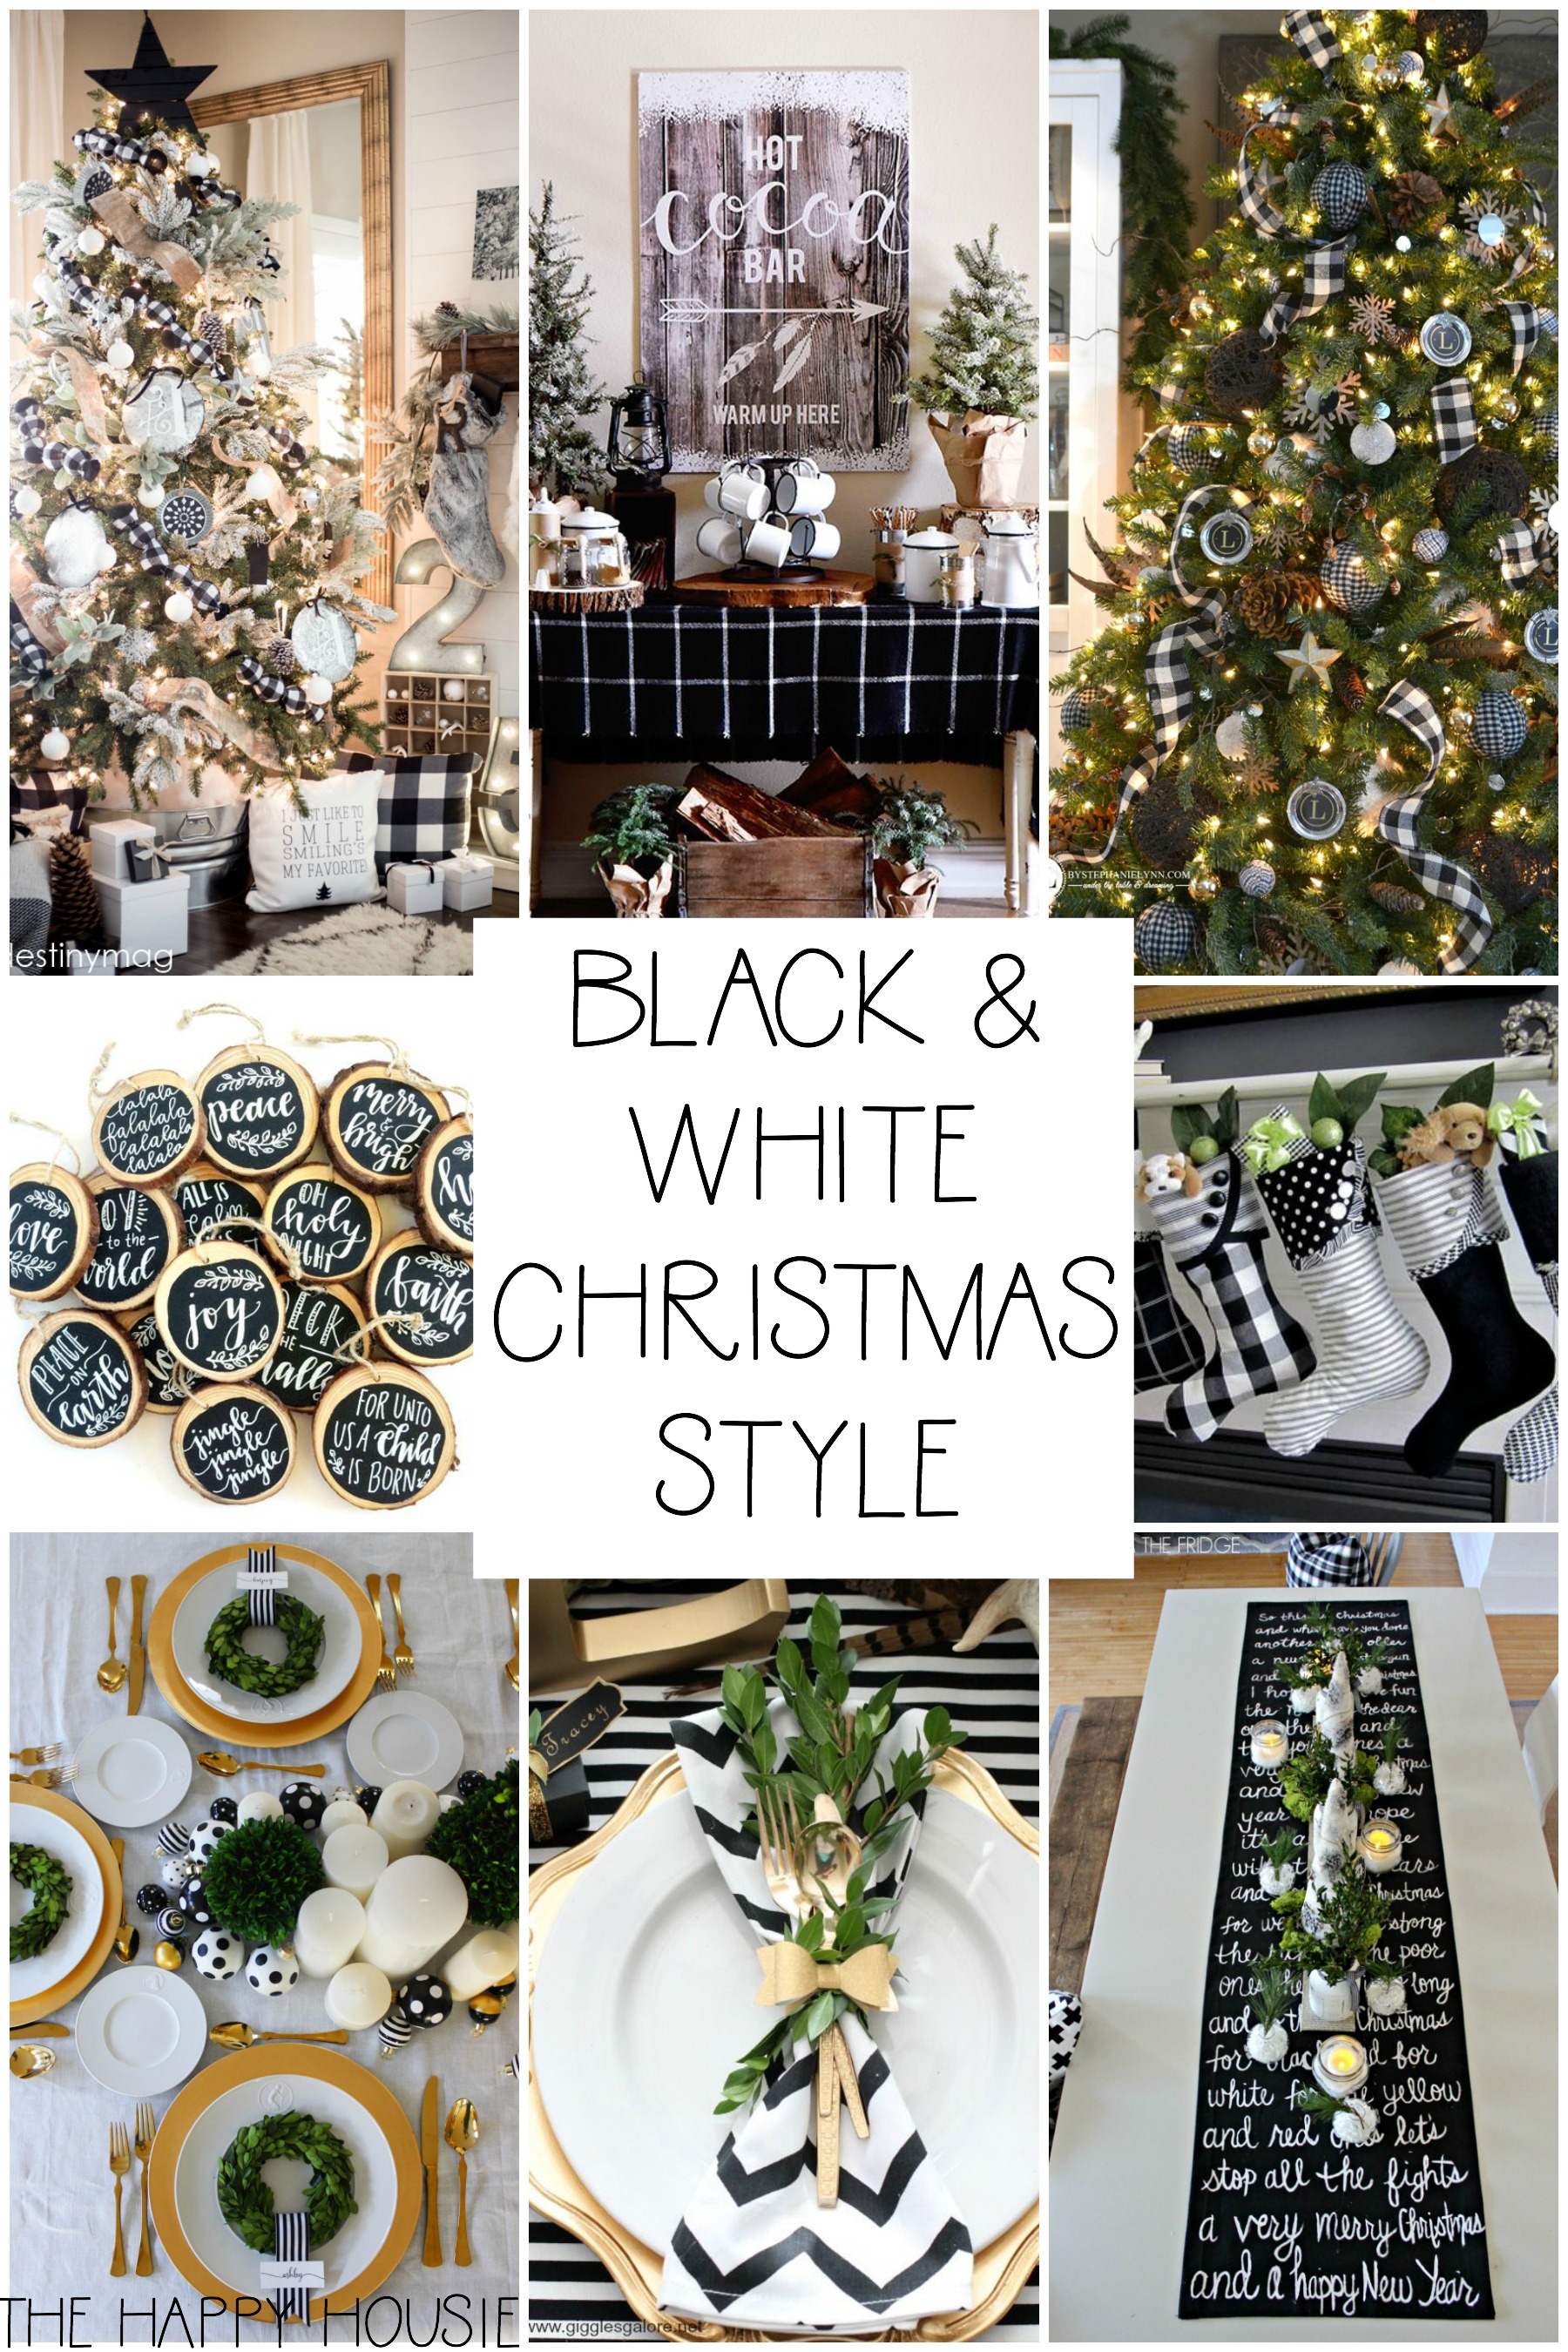 Black and White Christmas Style poster.